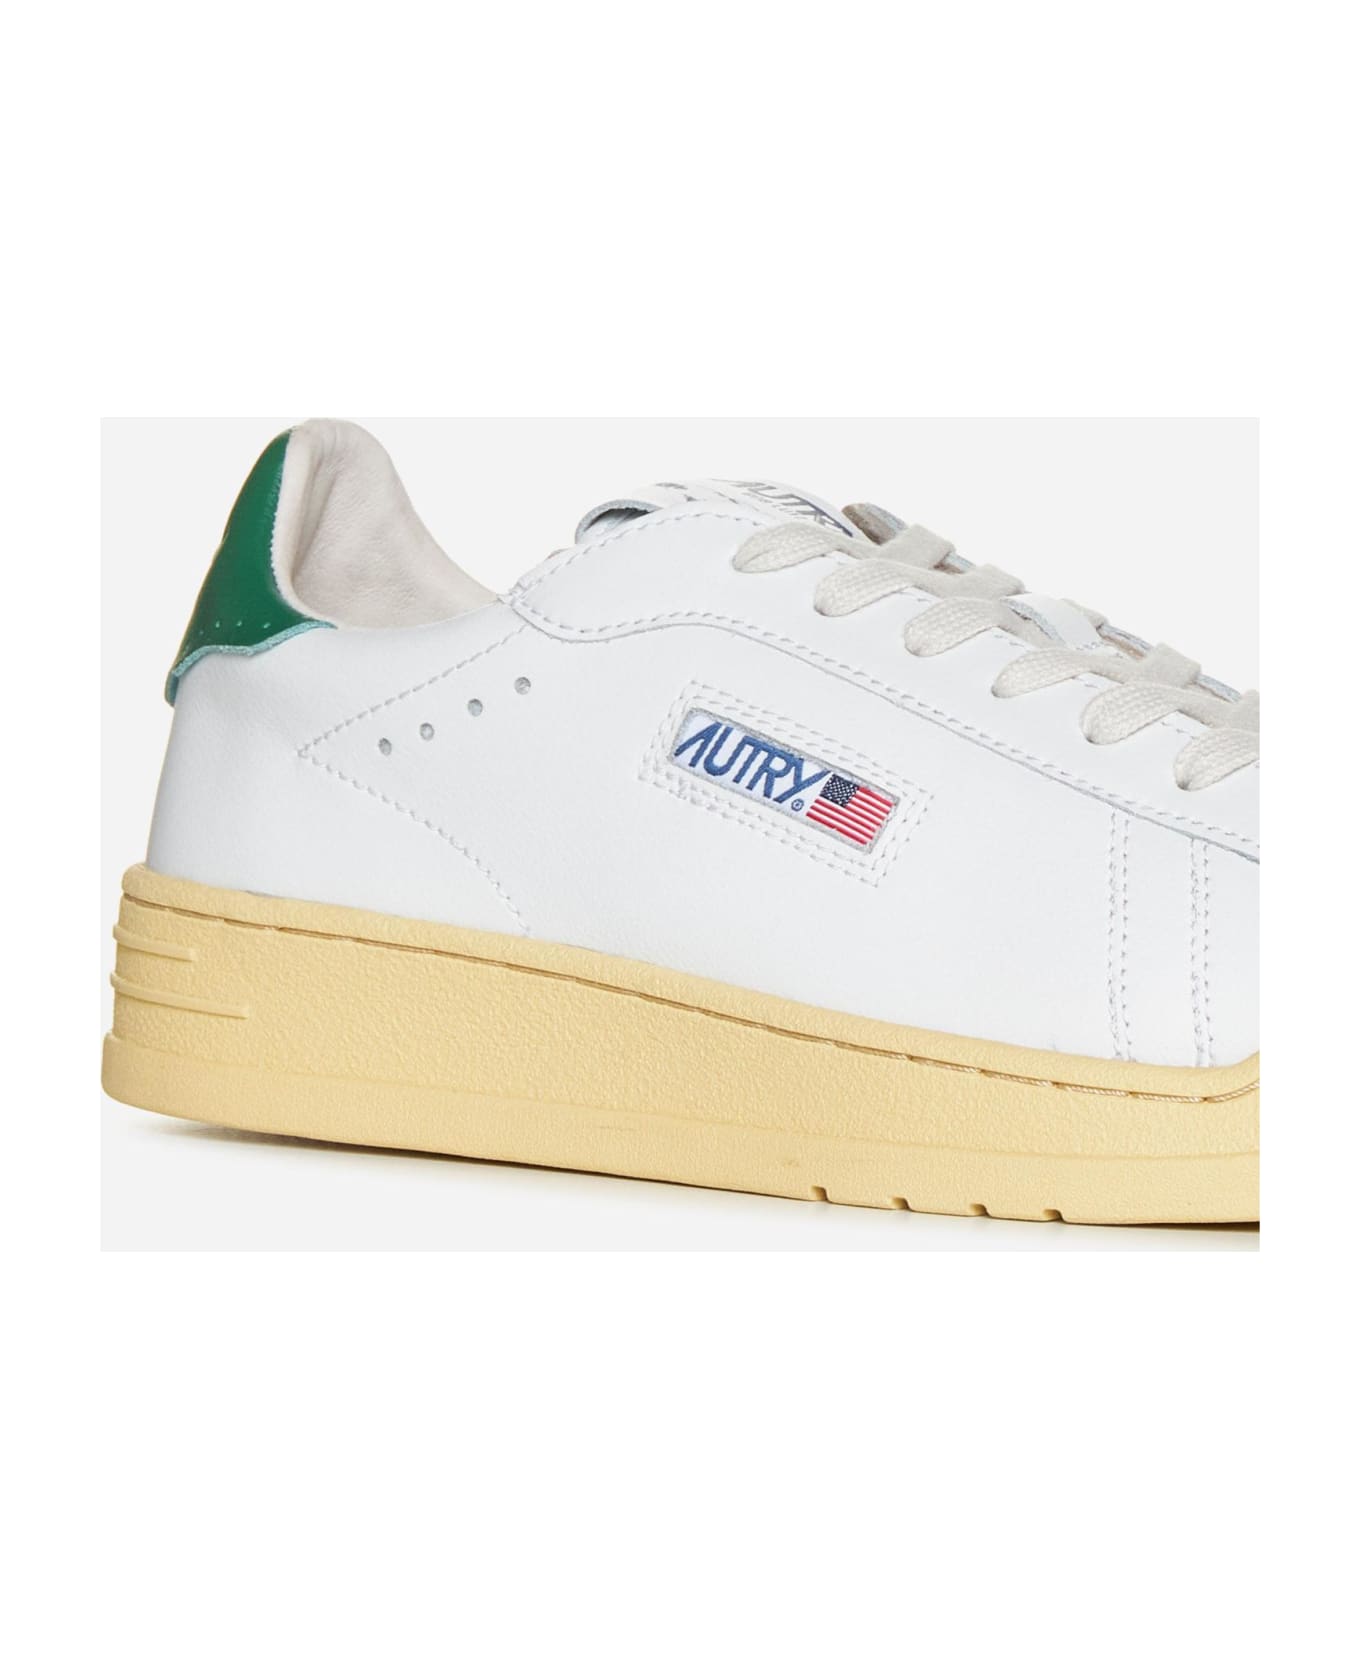 Autry Bob Lutz Low-top Leather Sneakers - White, green スニーカー